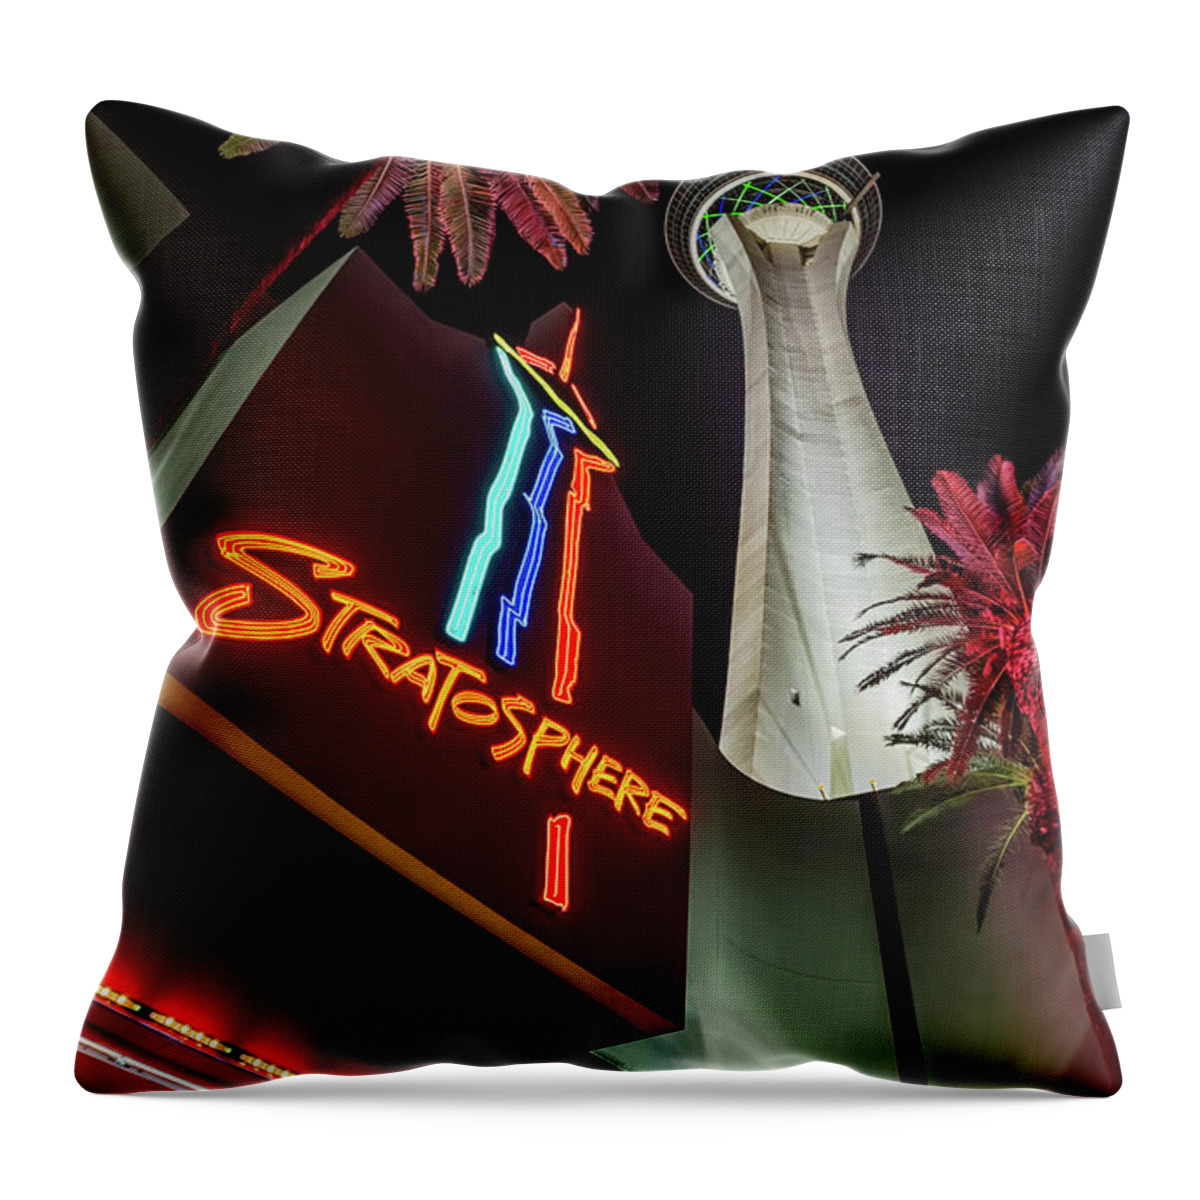 The Stratosphere Throw Pillow featuring the photograph The Stratosphere Tower Entrance by Aloha Art